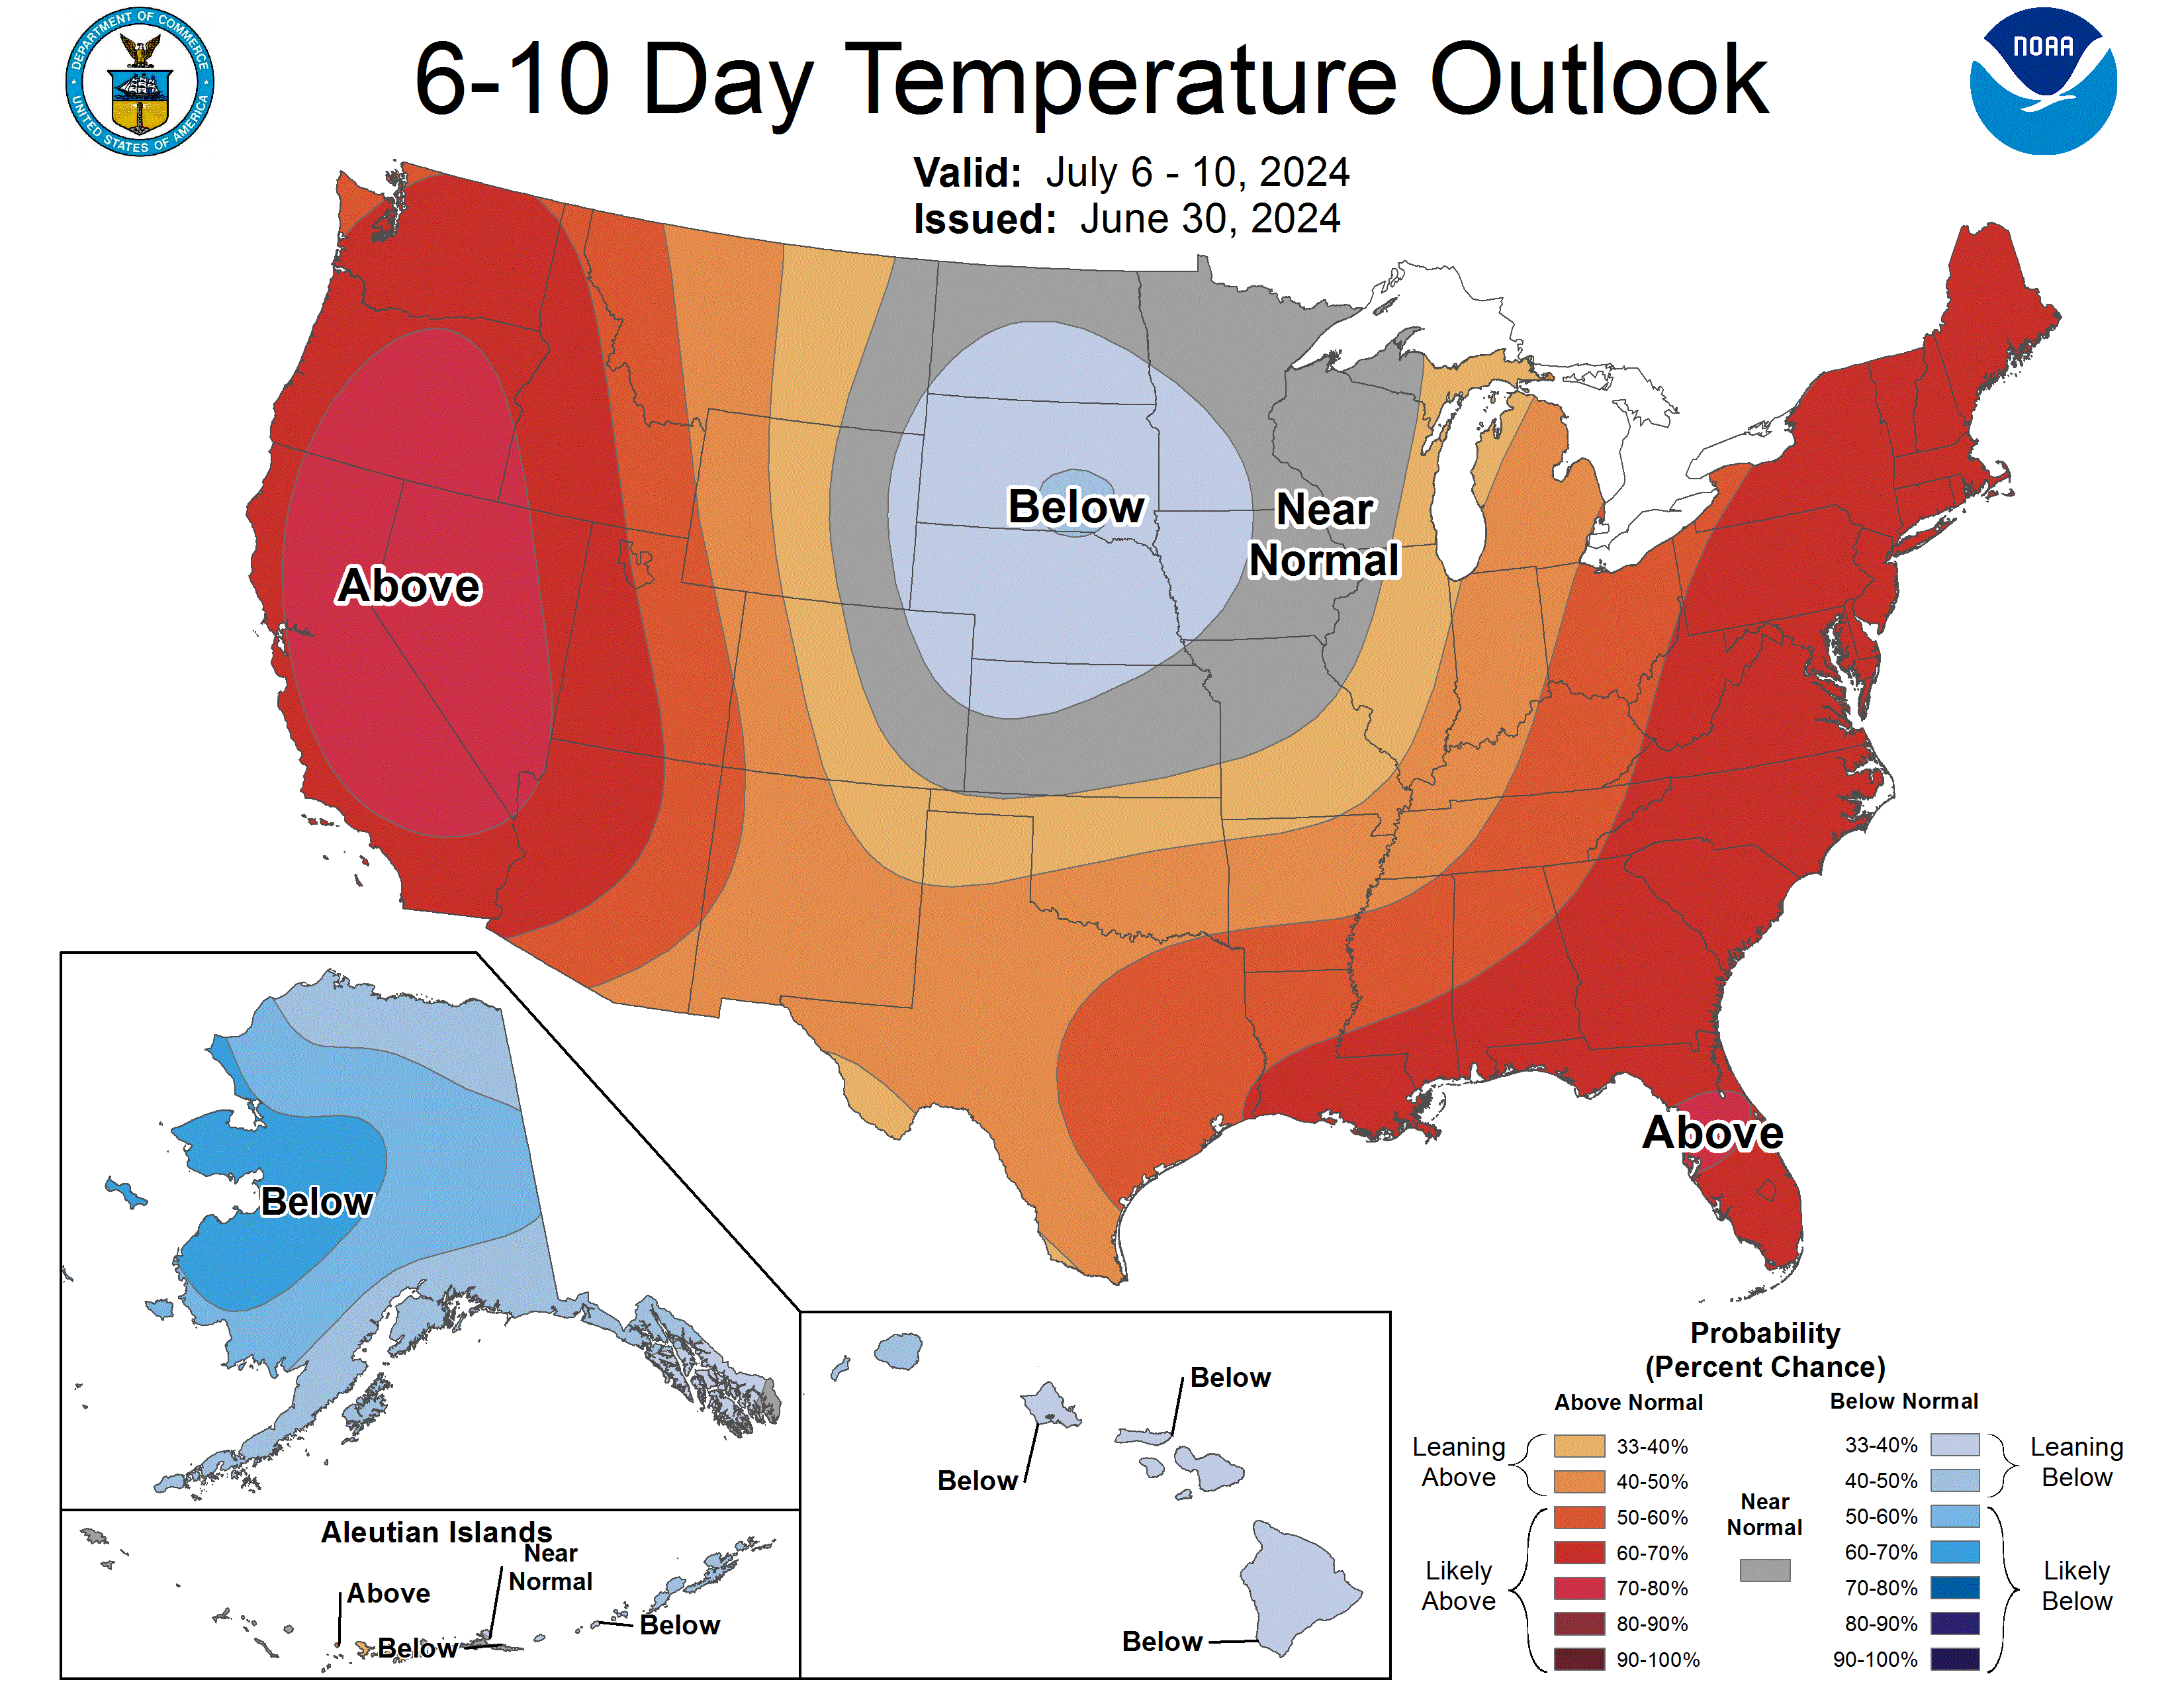 6 - 10 Day Temperature Outlook